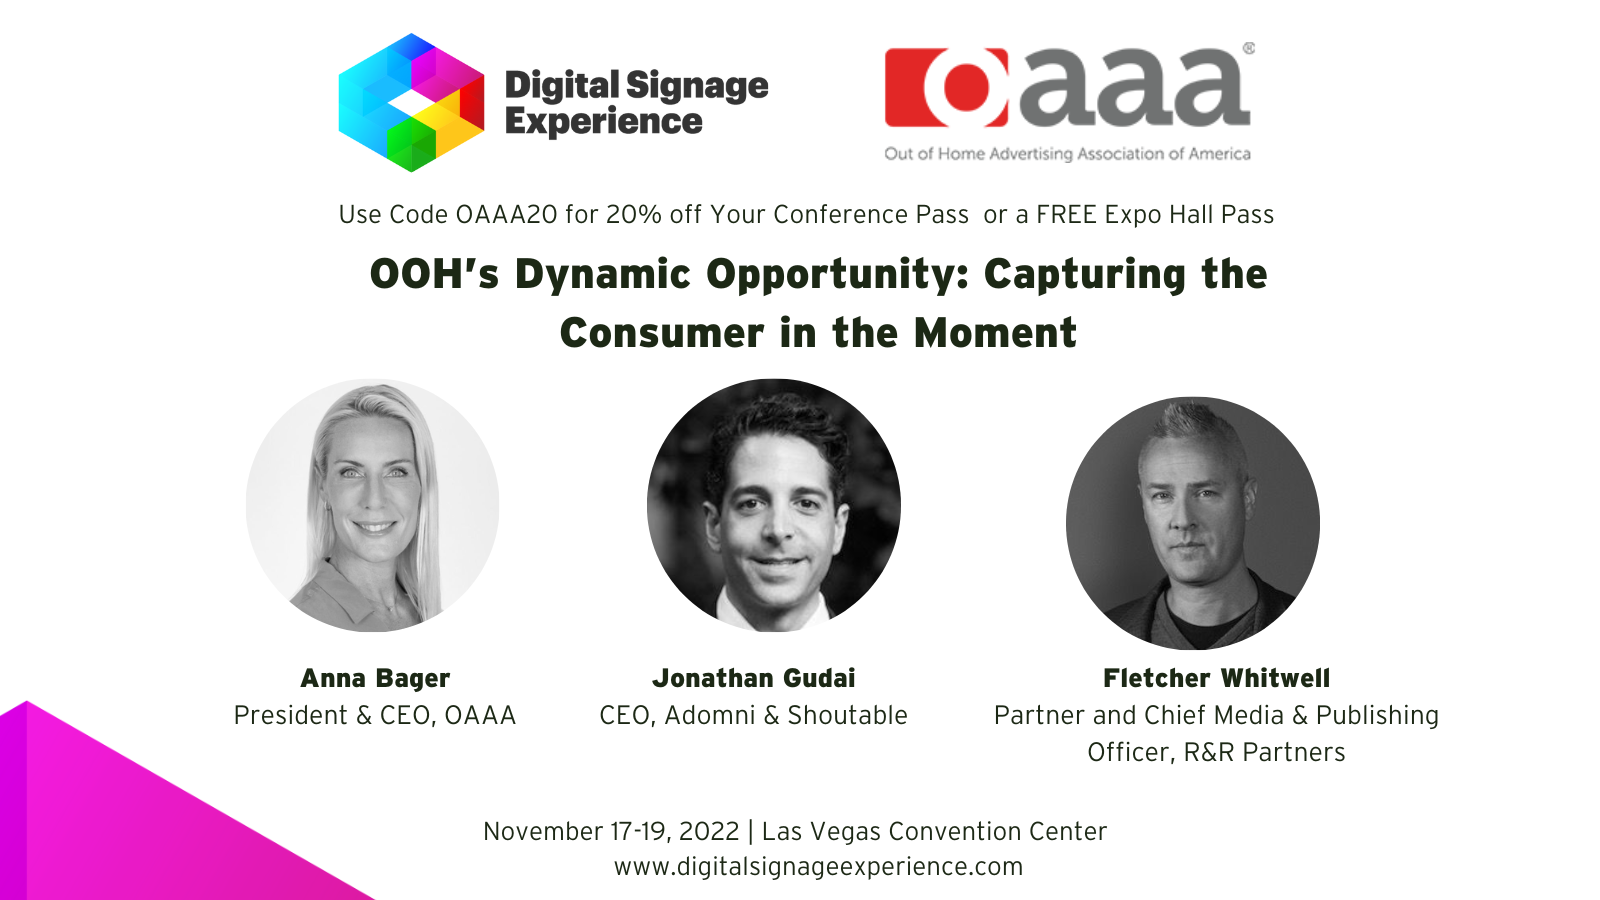 OAAA to Present Stellar Lineup of Programming at Digital Signage Experience 2022